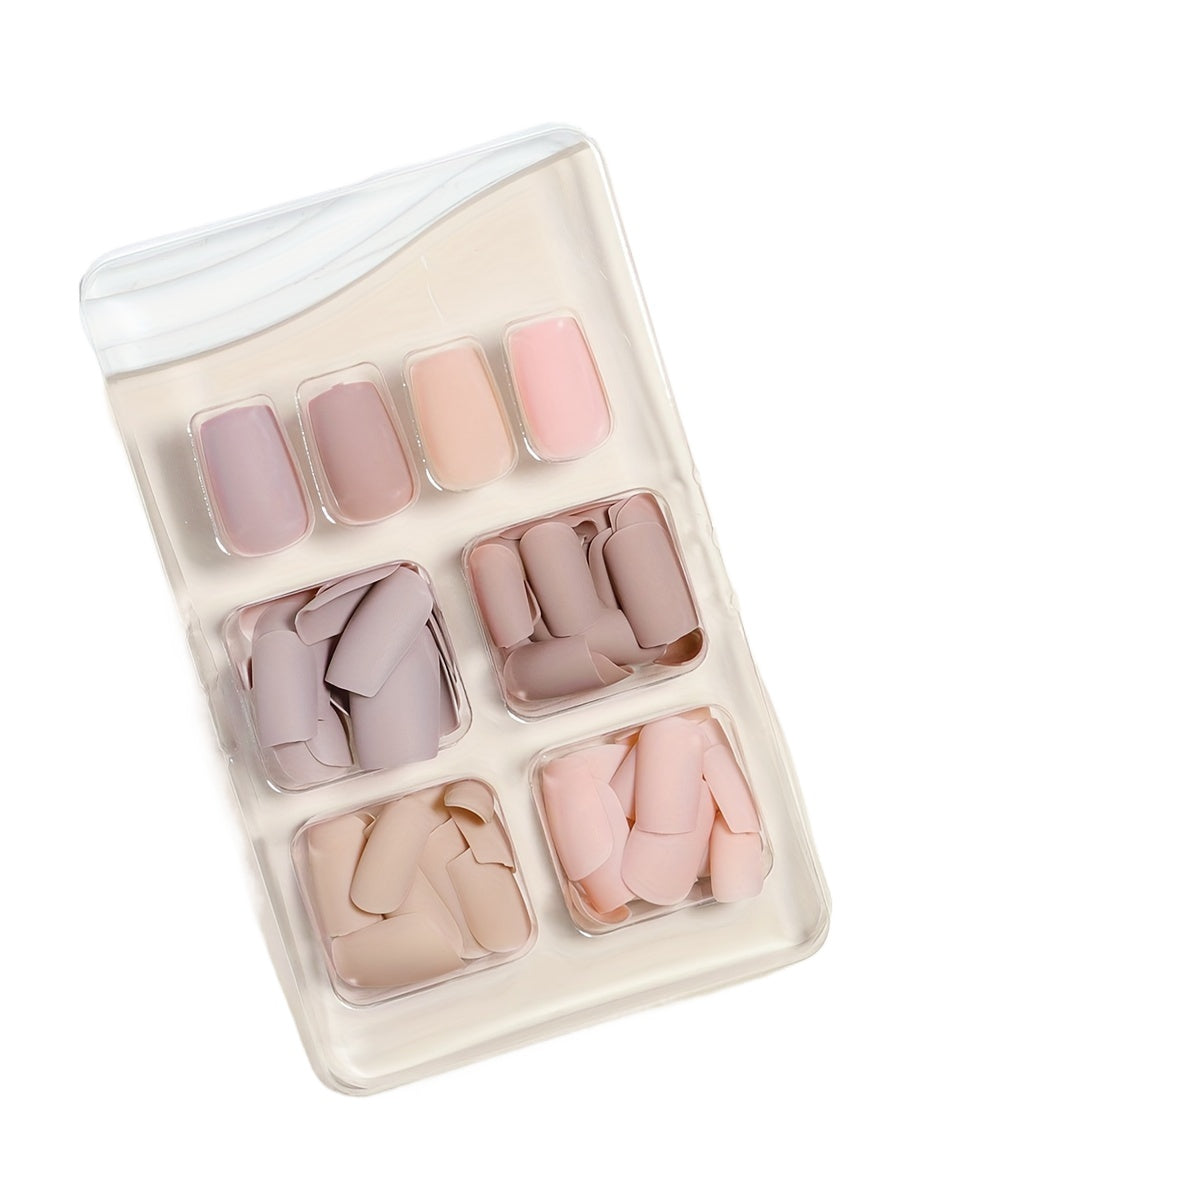 96-Piece Brown Series Square Press-On Nails - Medium Matte Faux Acrylic Set - 4 Colors for Women & Girls